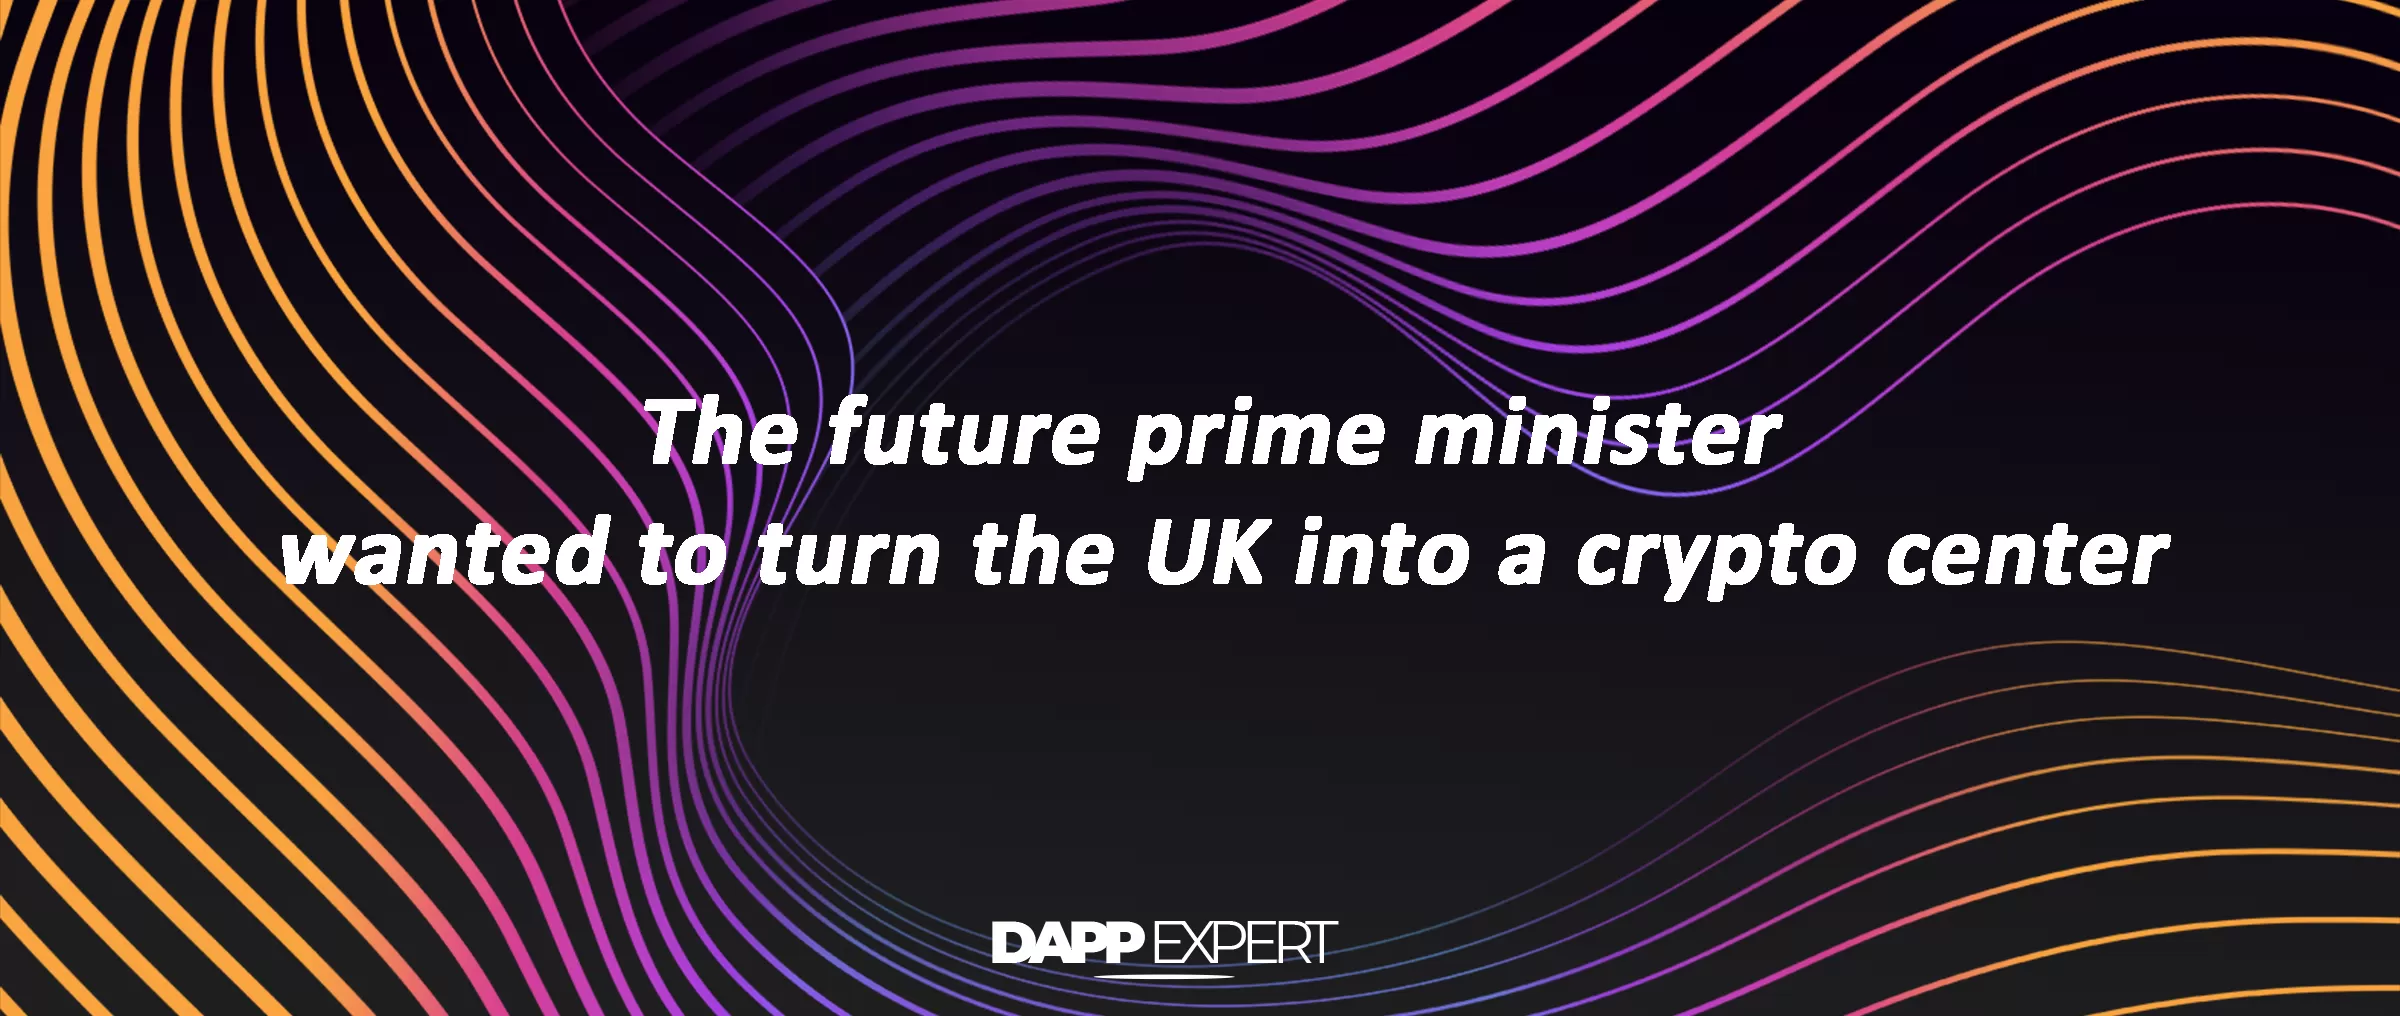 The future prime minister wanted to turn the UK into a crypto center